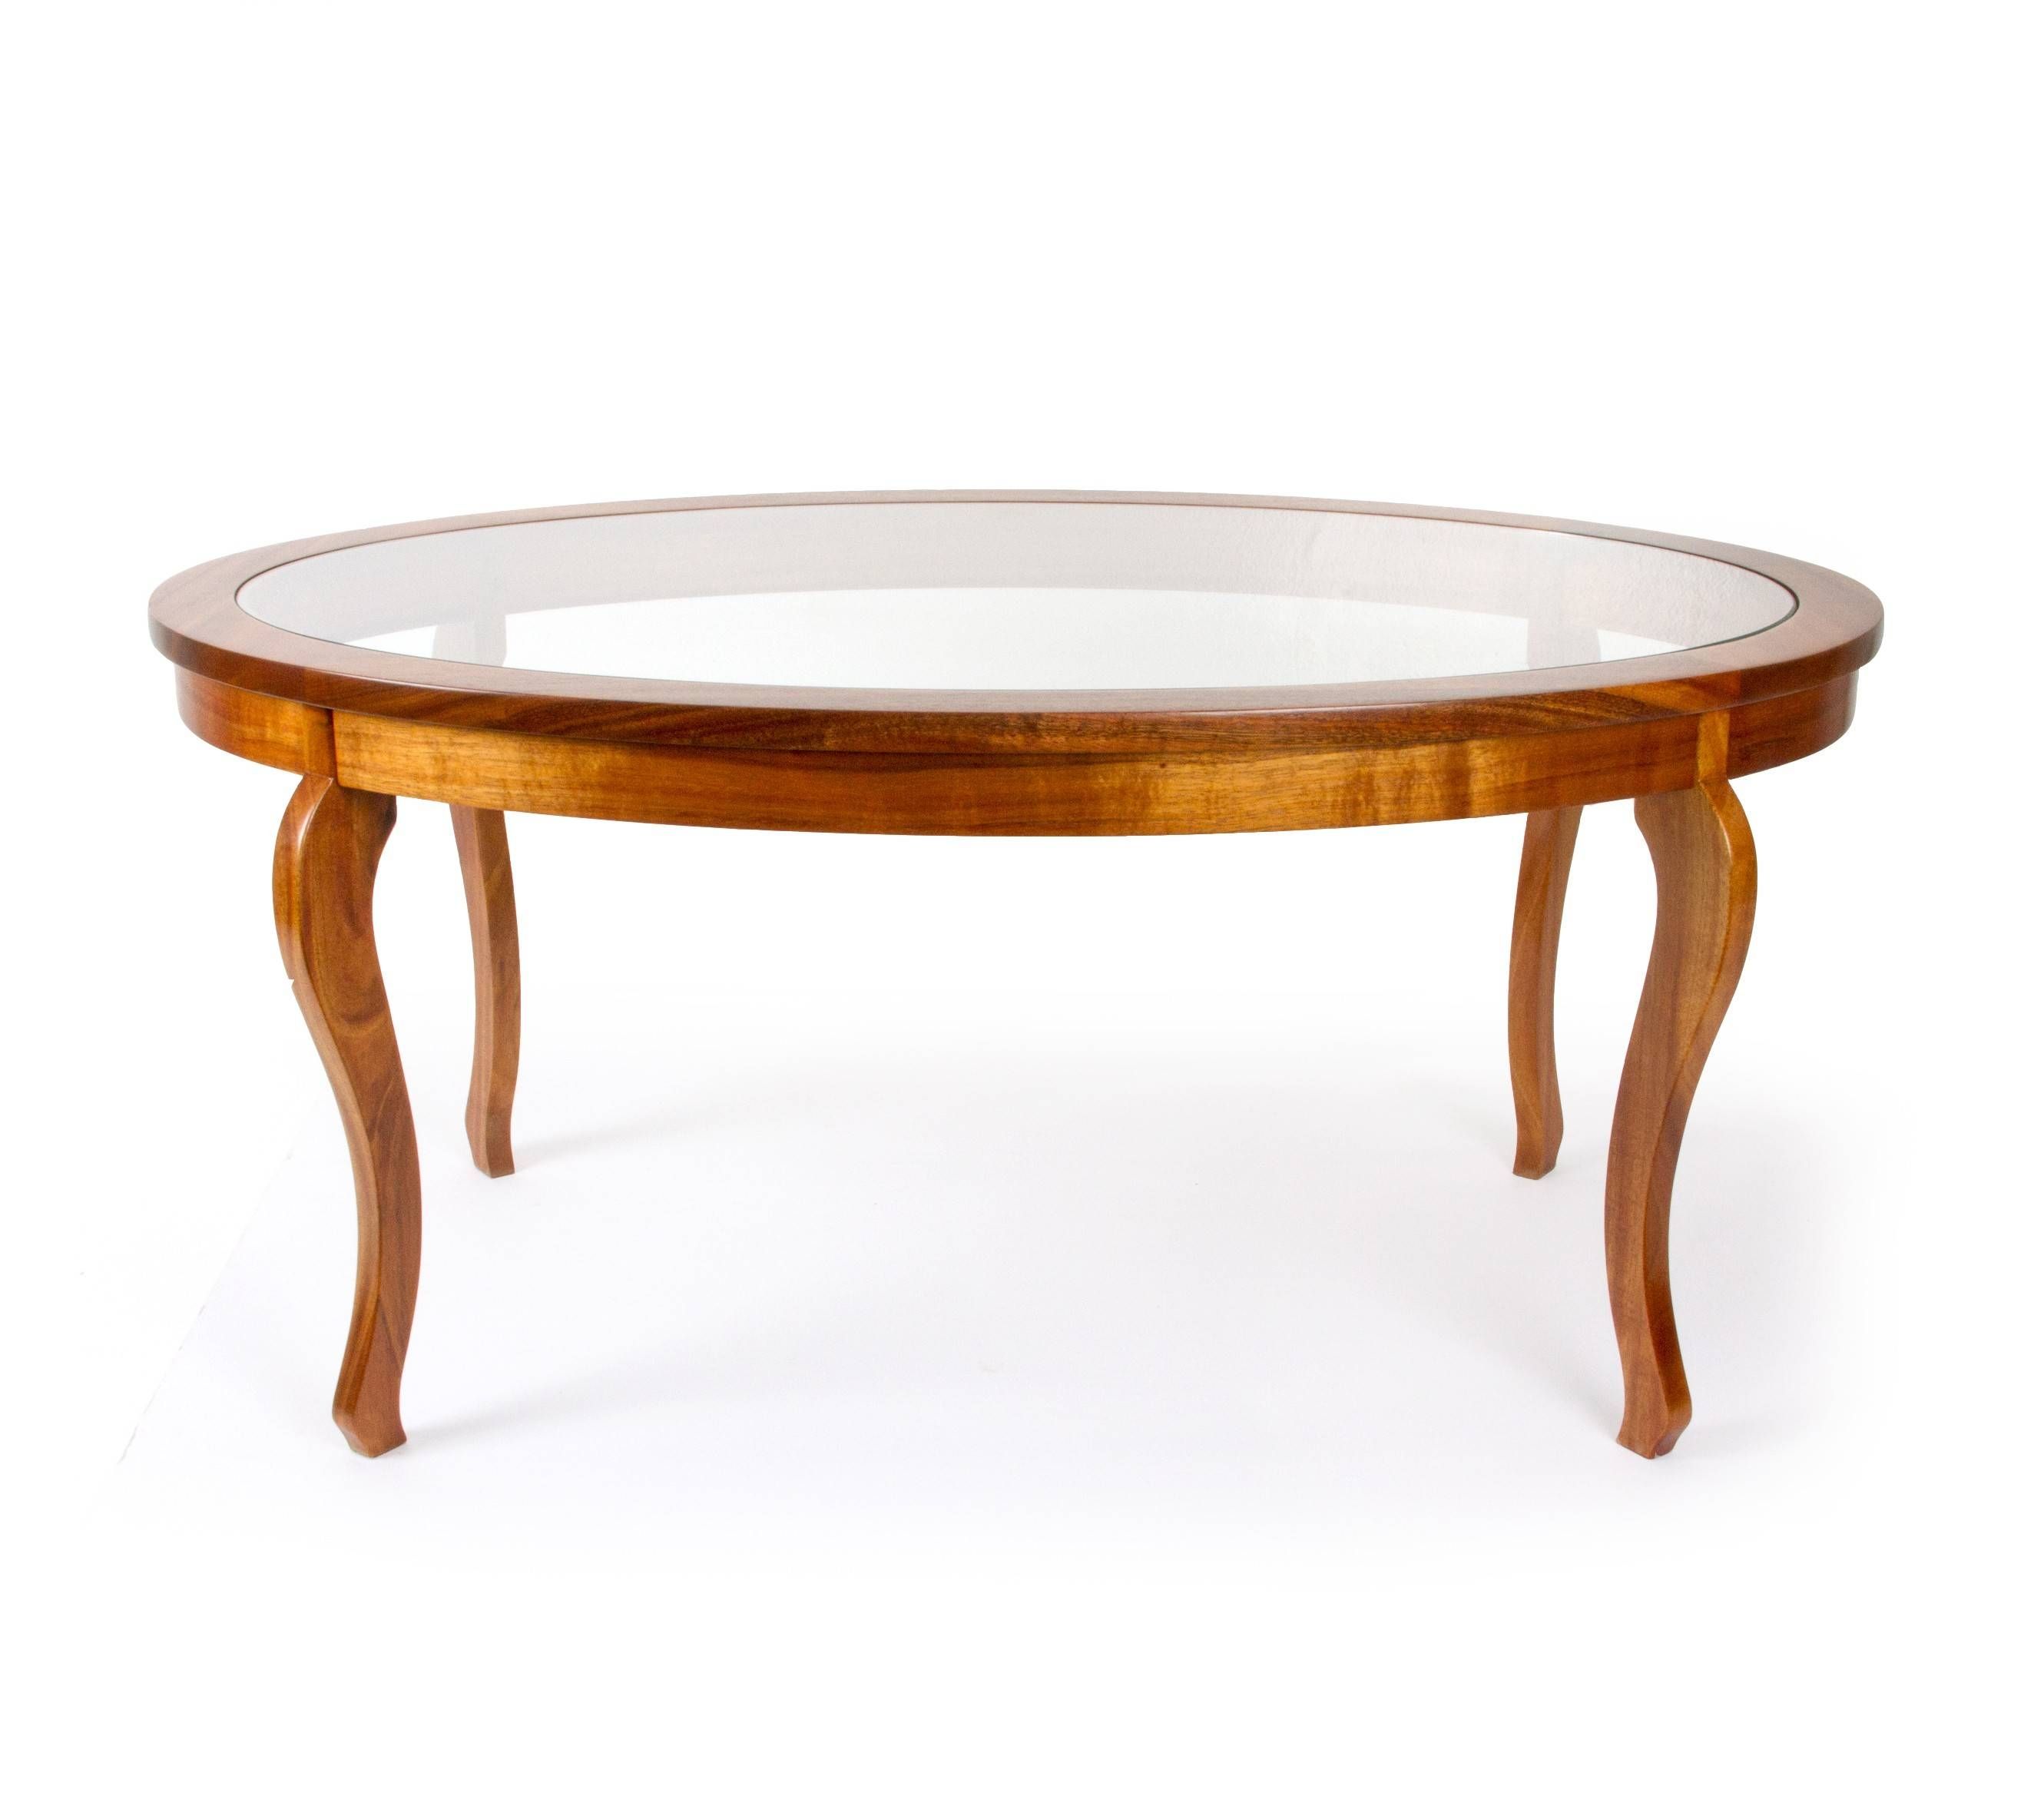 Coffee Table: Attractive Oval Glass Coffee Table Designs Oval End Throughout Small Glass Coffee Tables (View 10 of 15)